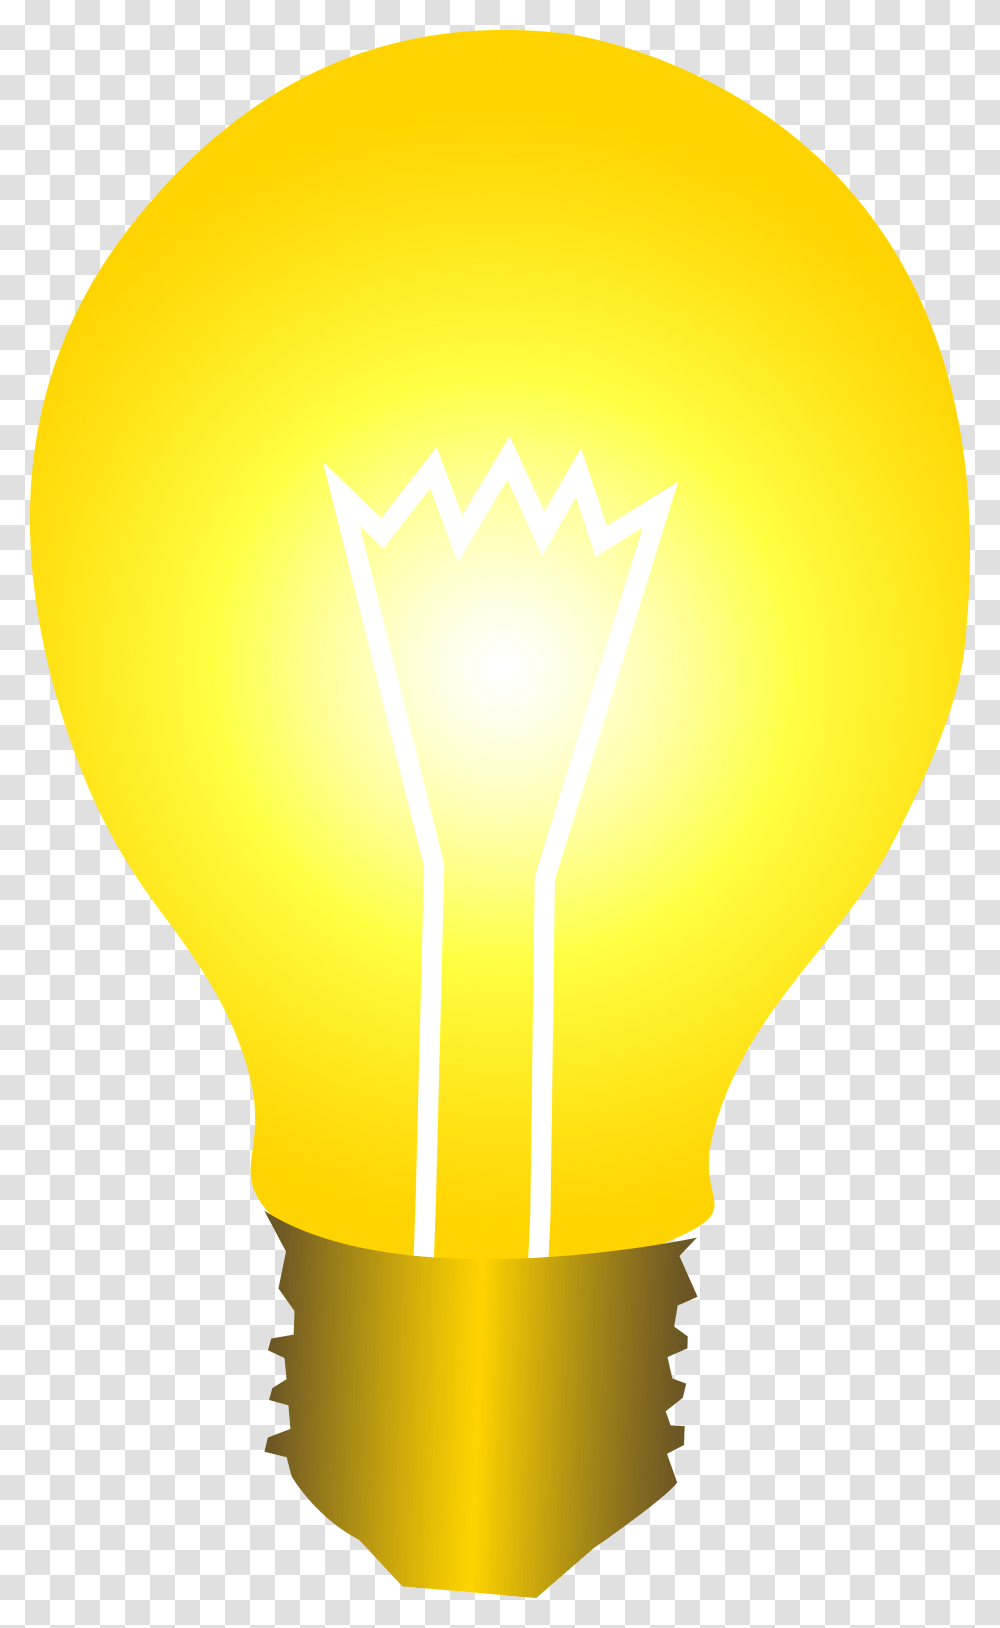 Awesome Light Bulb Clip Art And A Star Vector Clipartix Light Bulb Clip Art, Lightbulb, Lamp Transparent Png